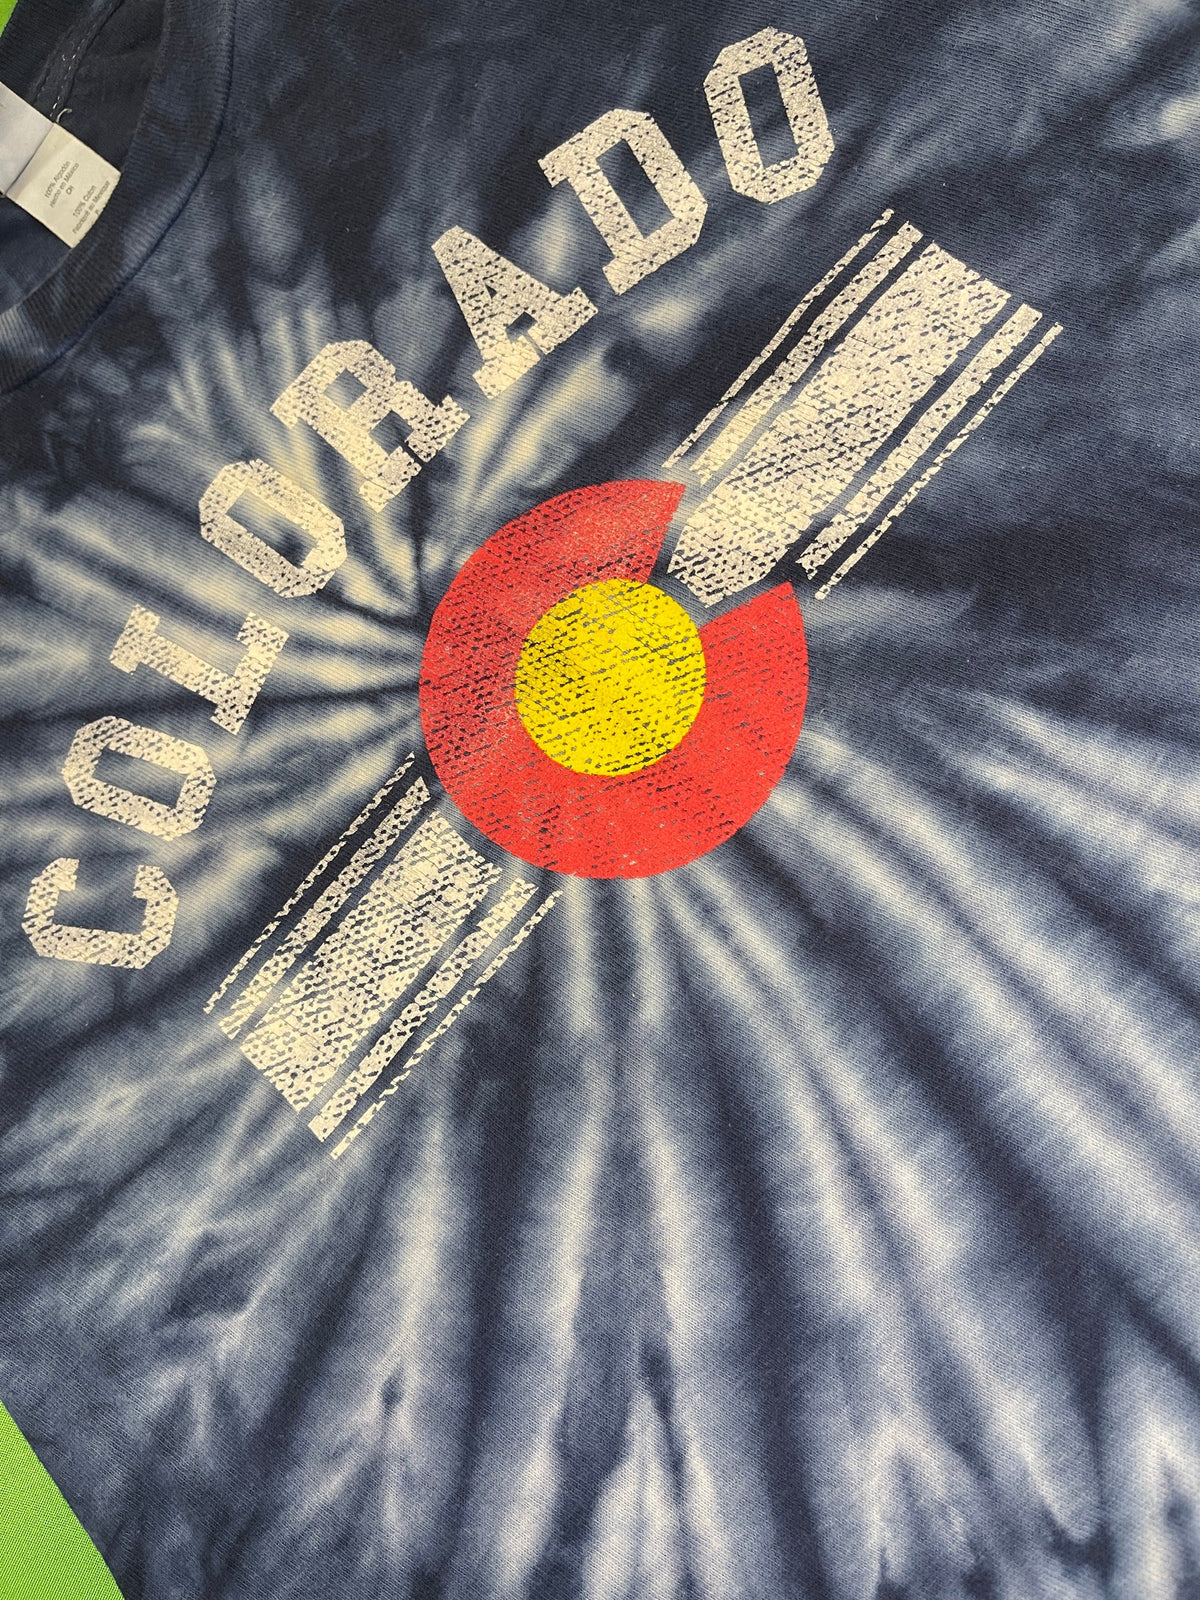 Colorado Flag Tie-Dye 100% Cotton T-Shirt Youth Small 8